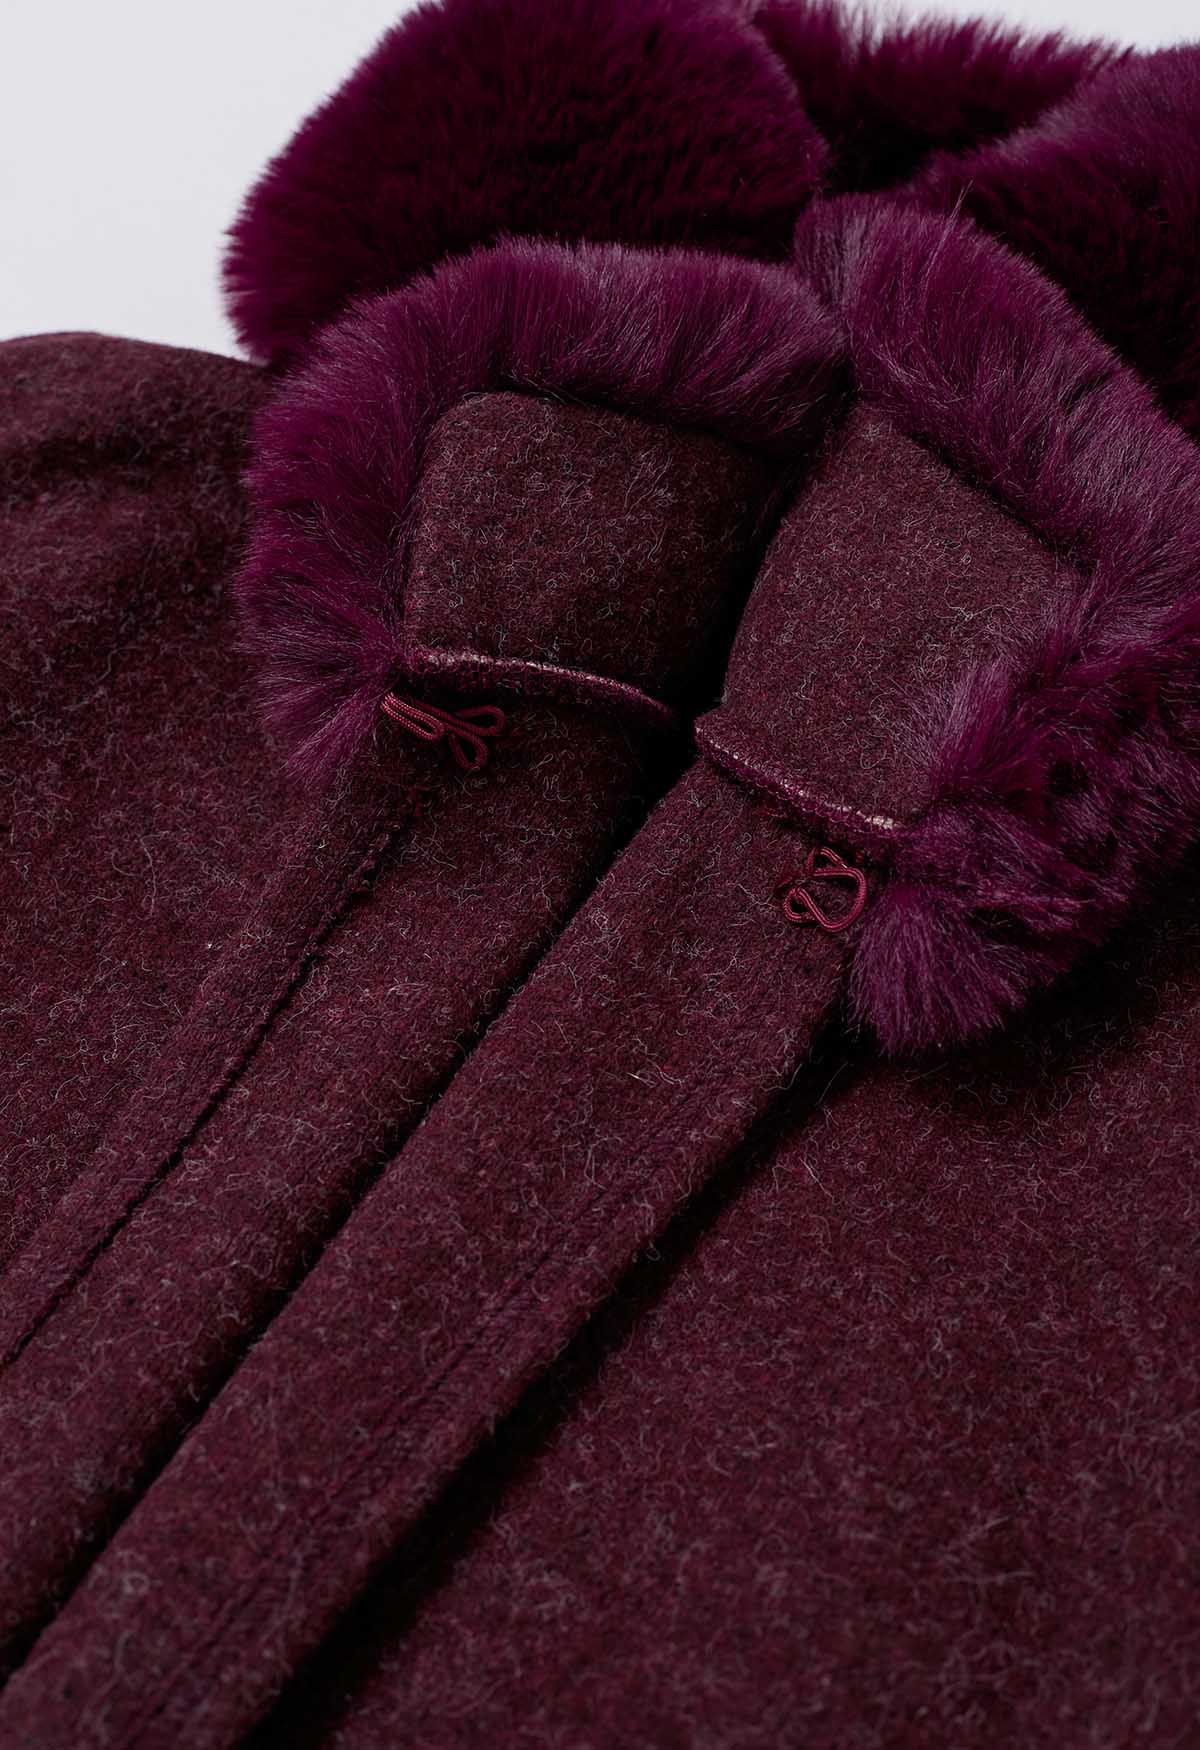 Self-Tie Bowknot Faux Fur Poncho in Burgundy - Retro, Indie and Unique ...